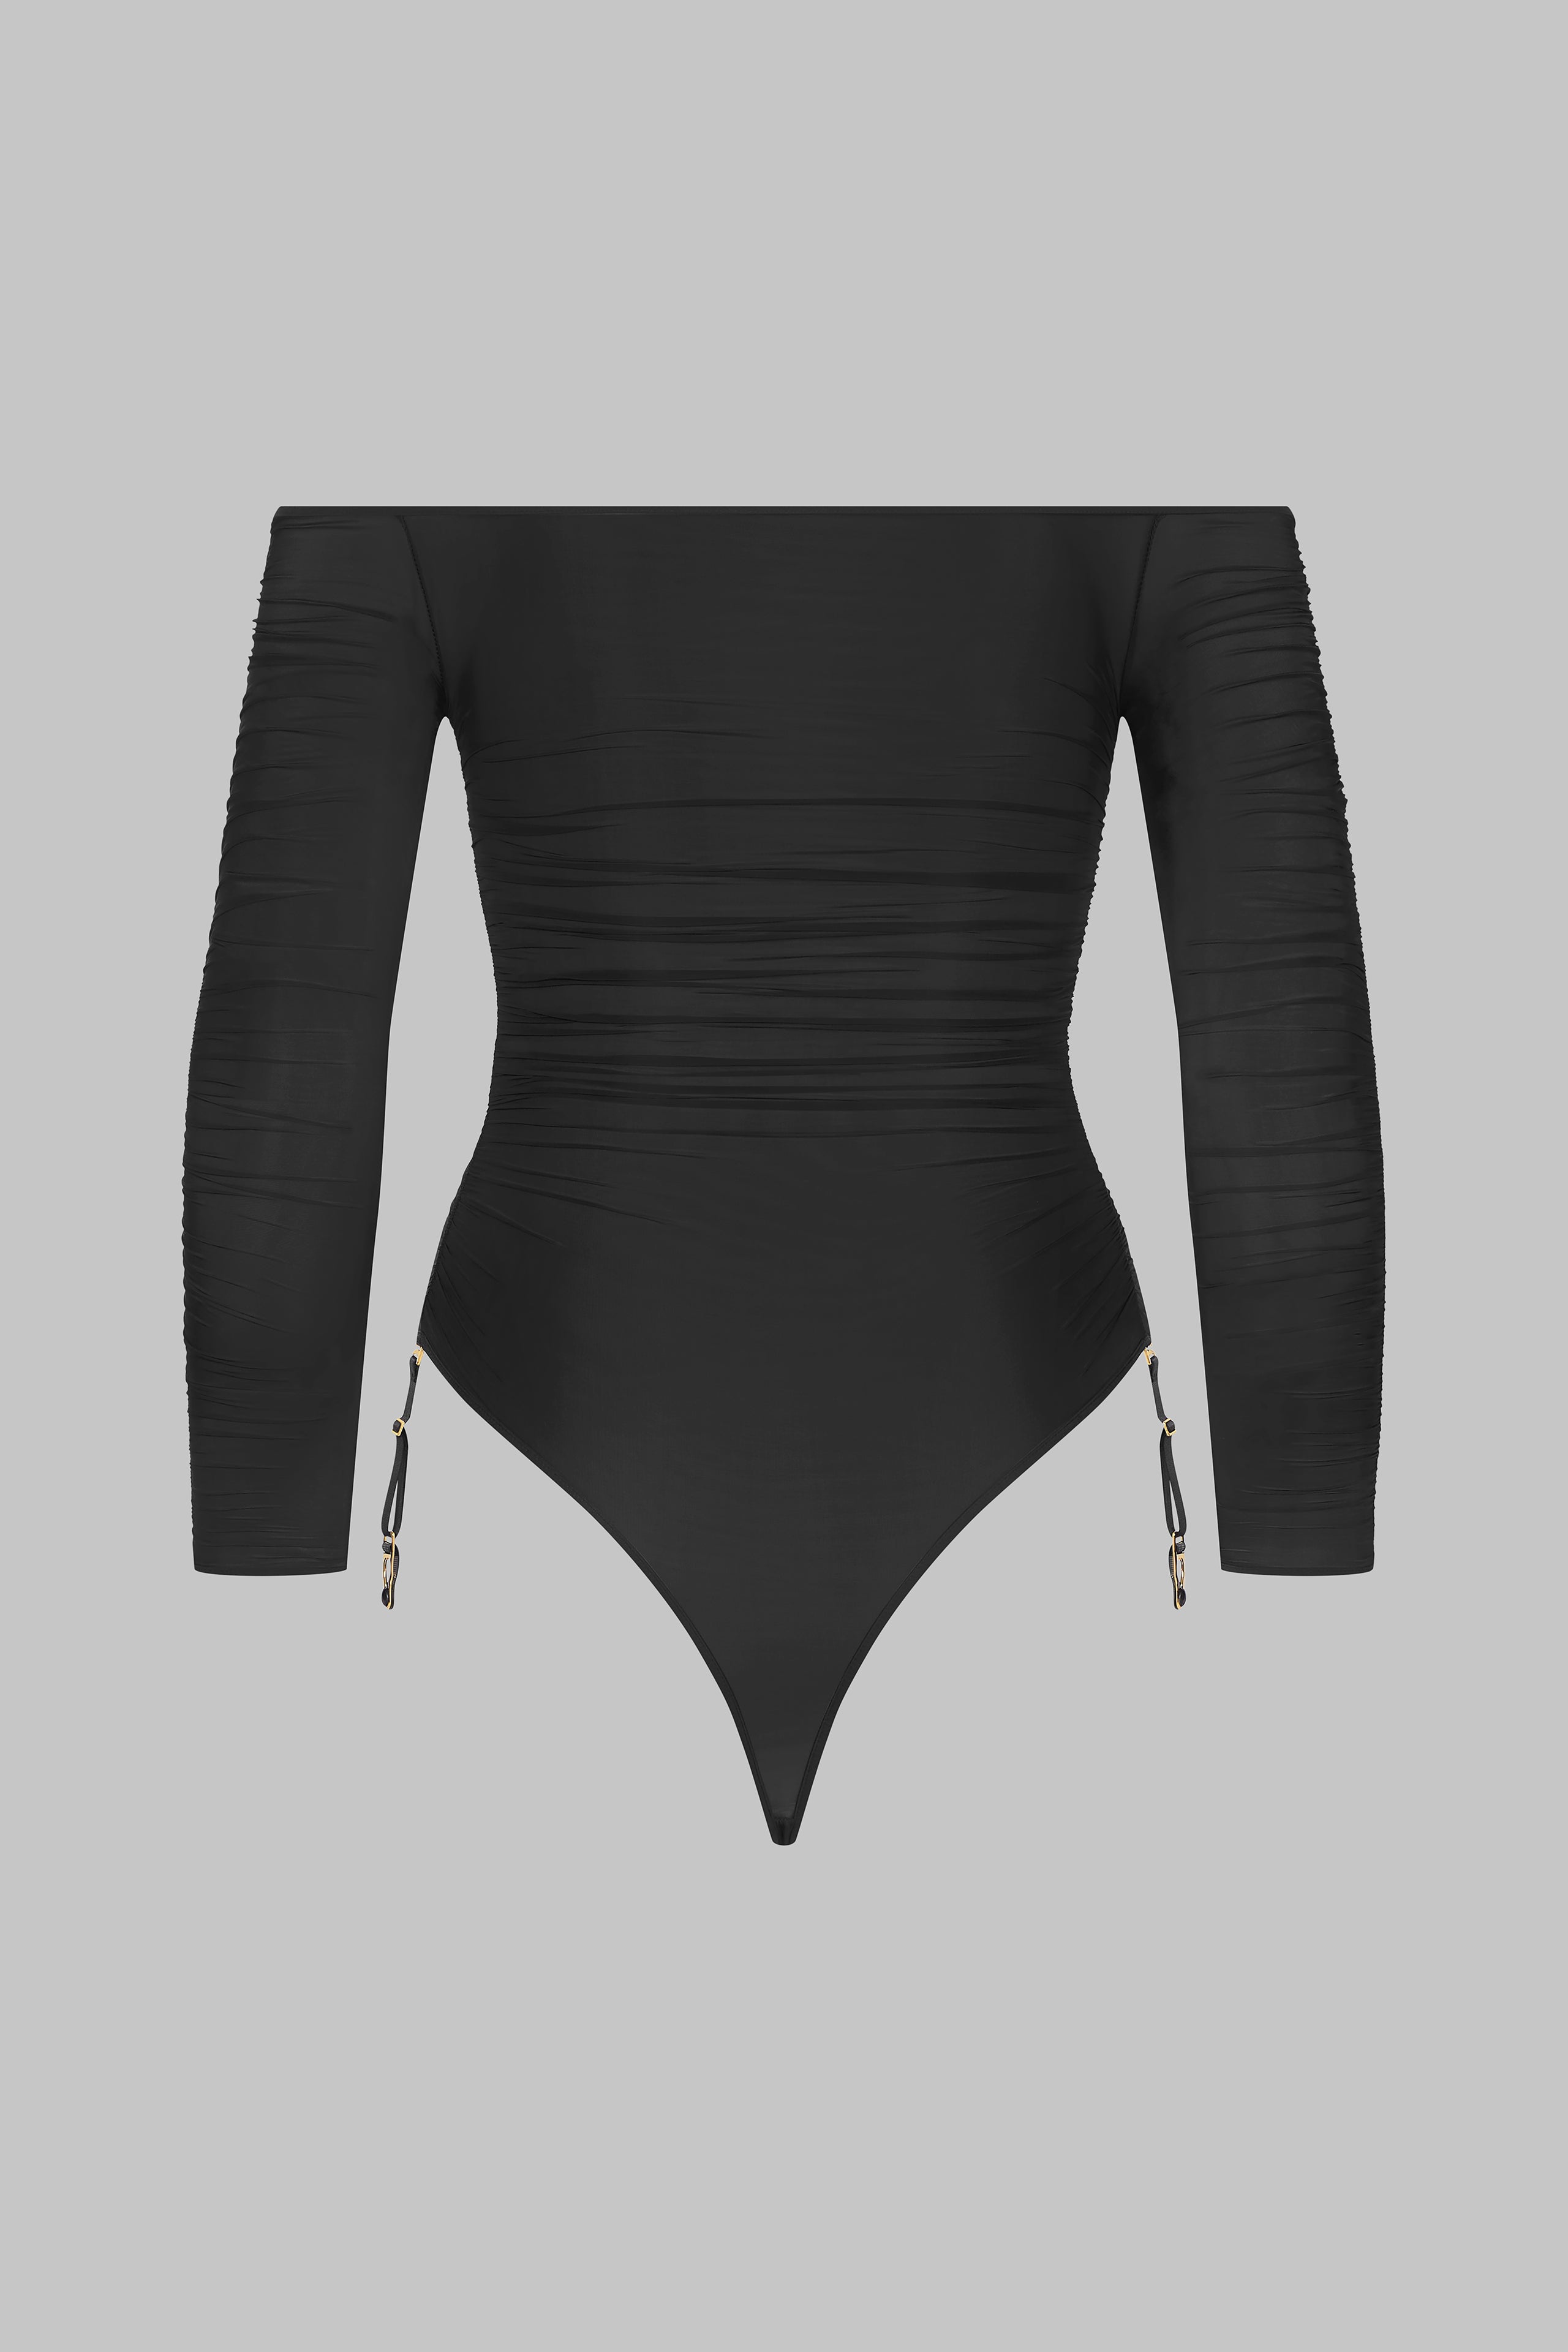 Boat Collar Thong Body - Nuit Fauve